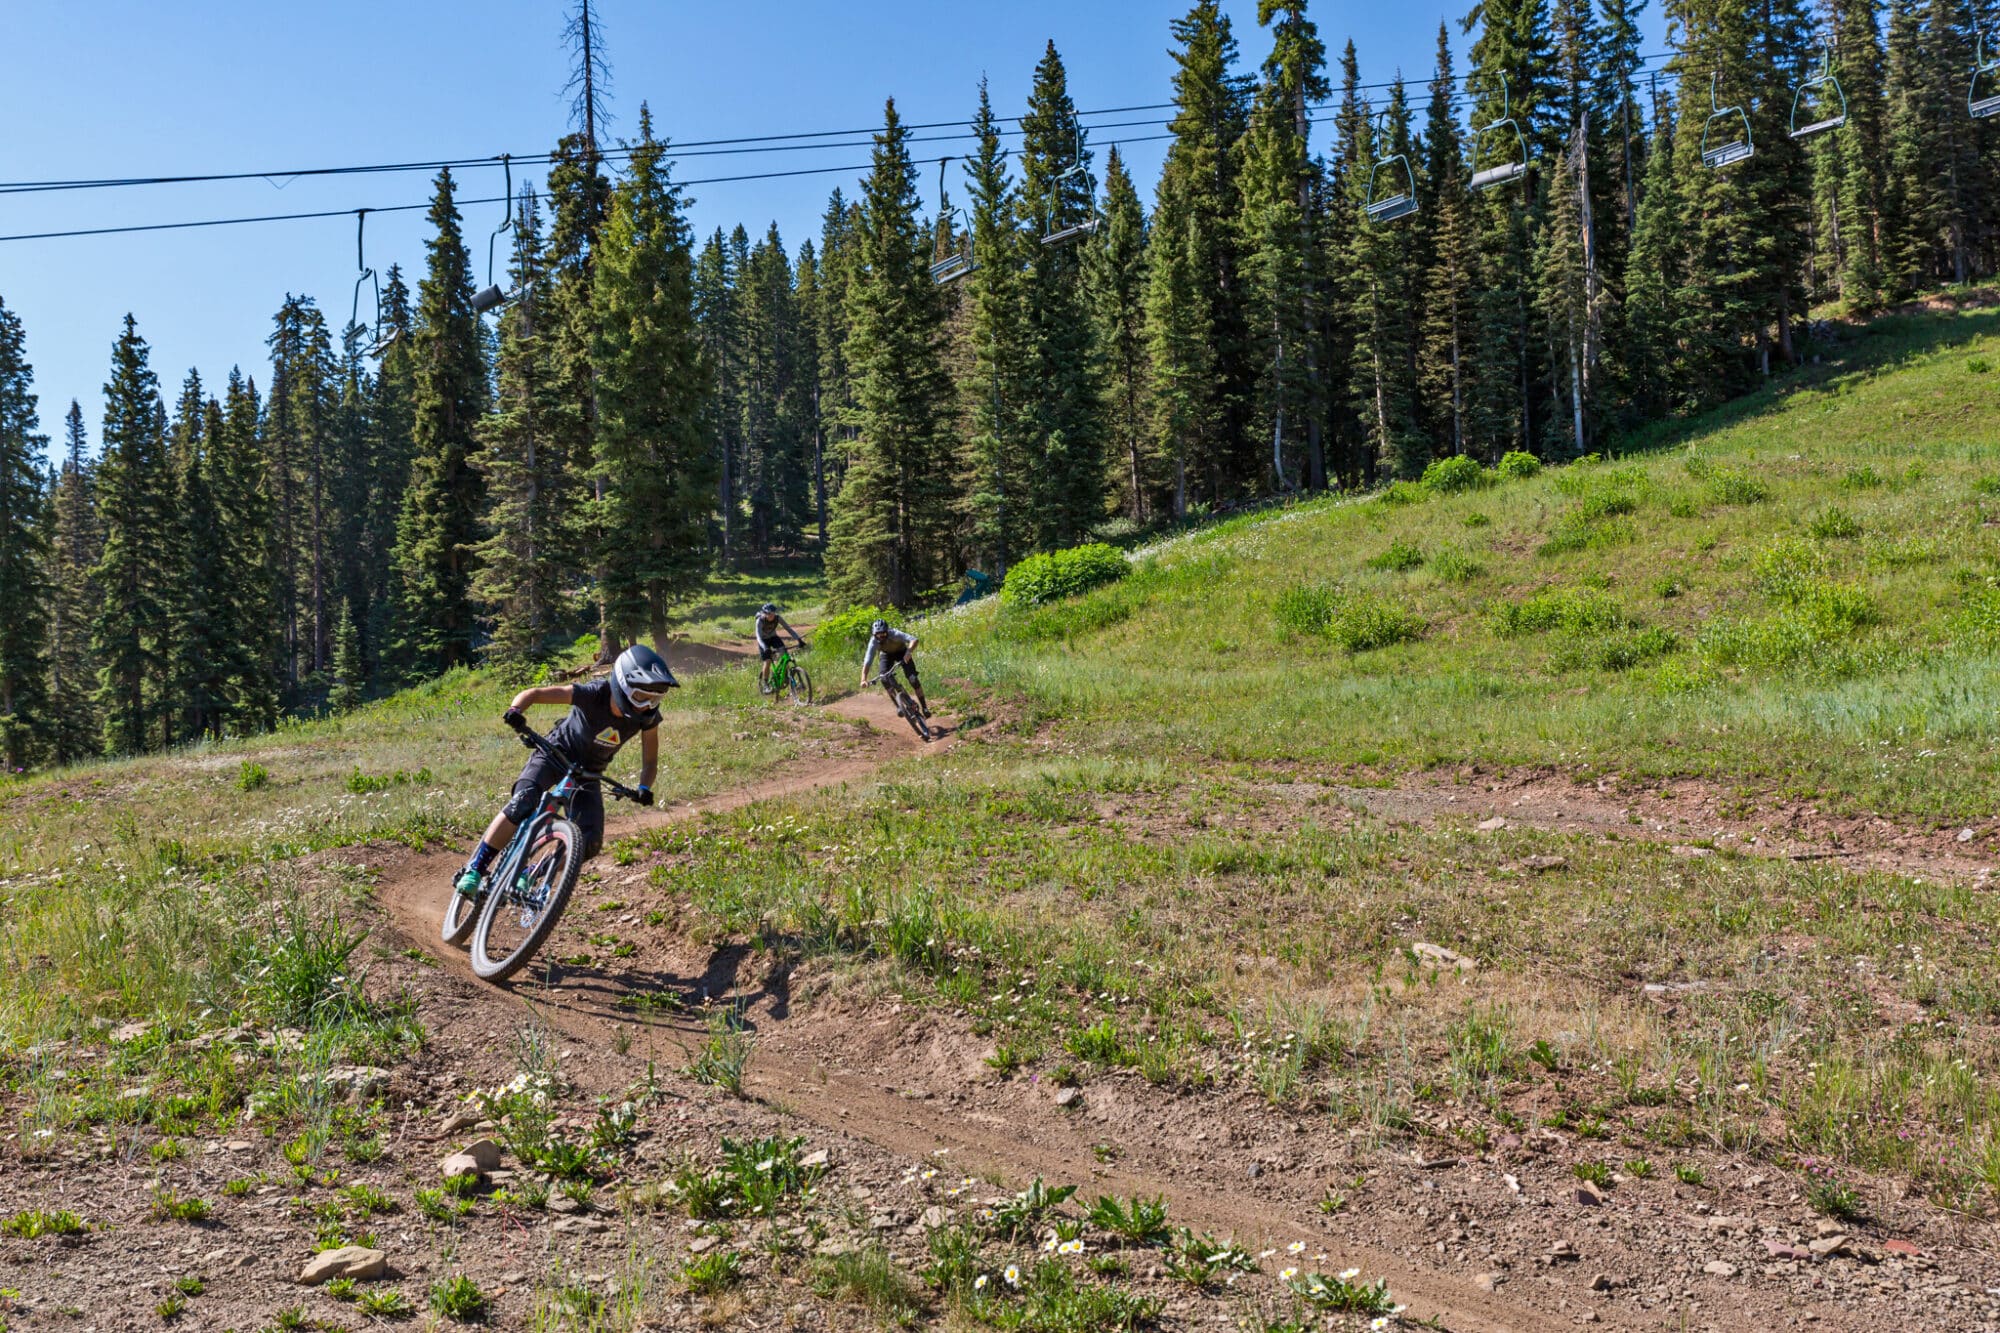 Group of advanced mountain bikers ride down the mountain in a line